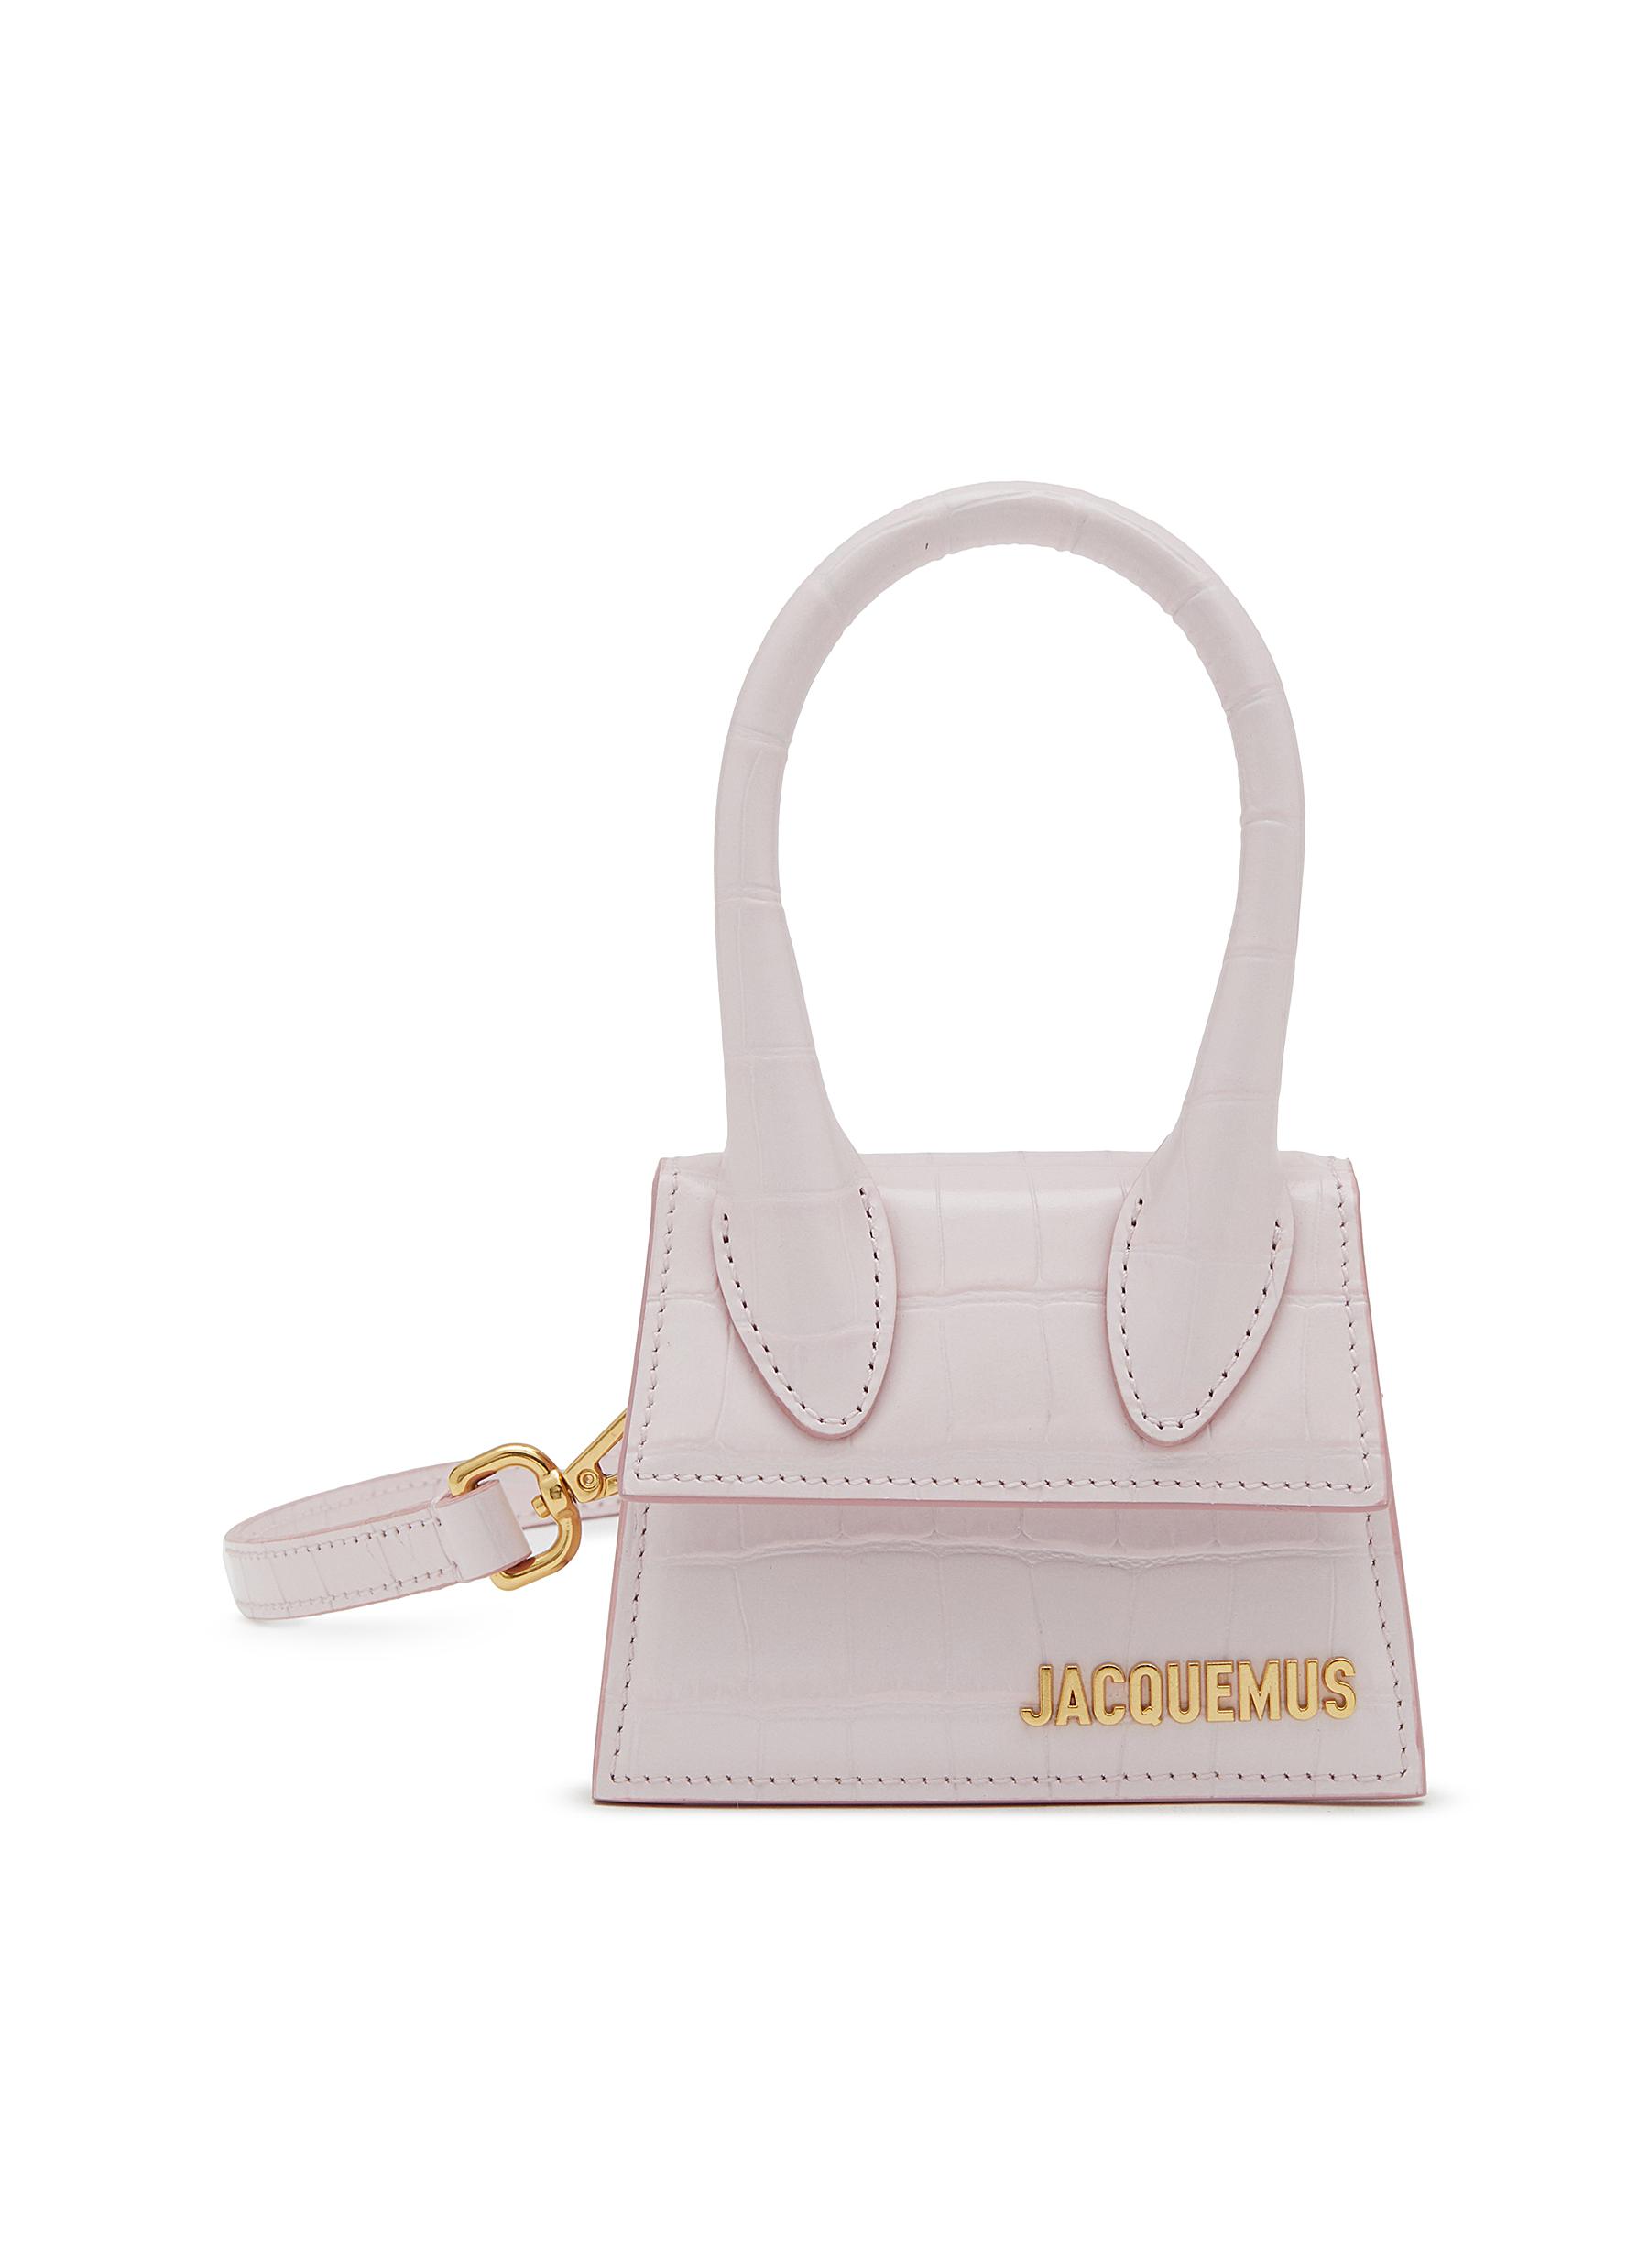 JACQUEMUS, Small Le Chiquito Leather Shoulder Bag, LIGHT PINK, Women